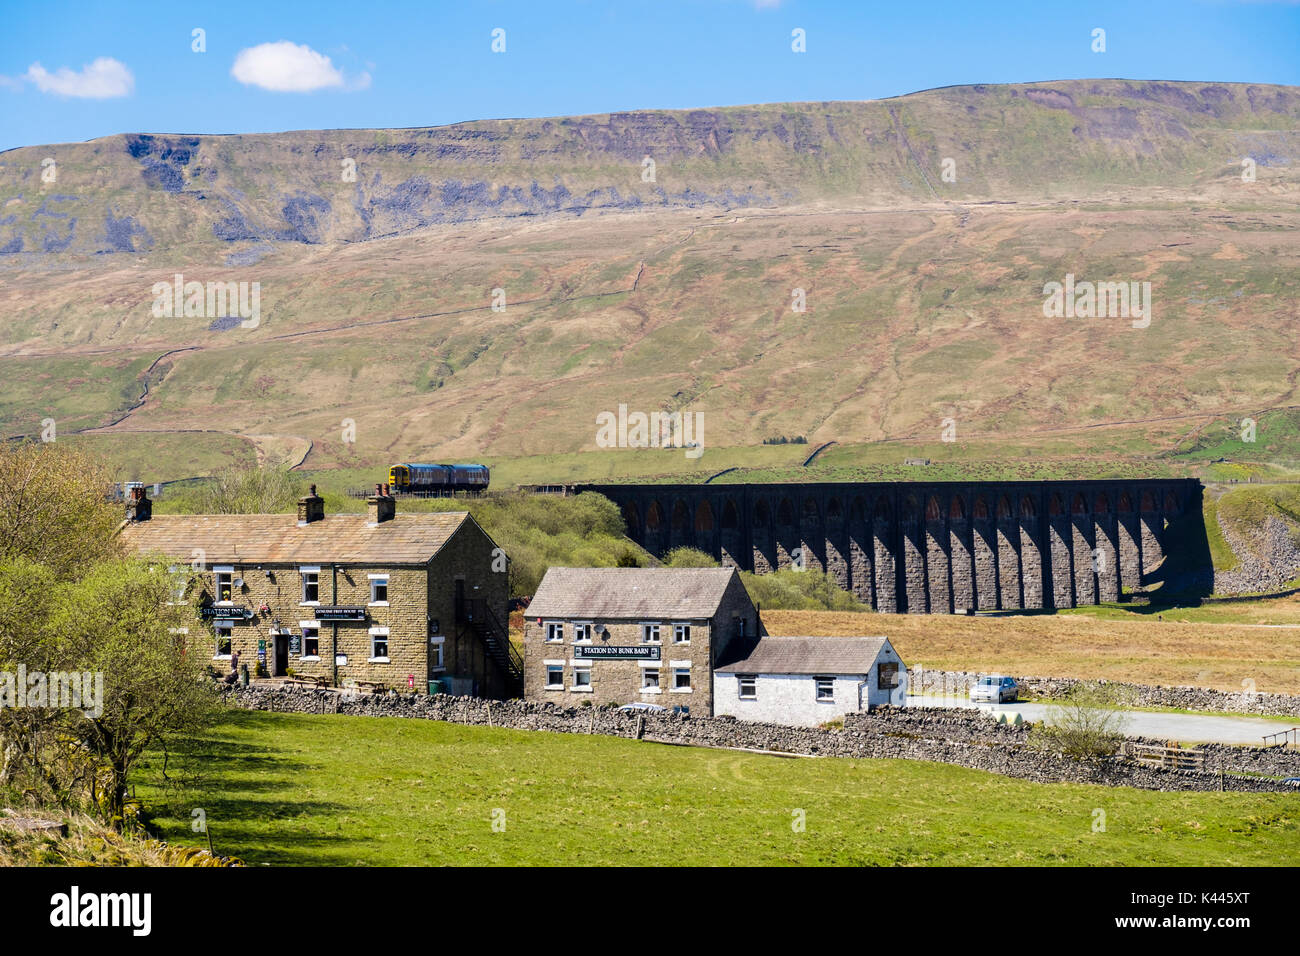 Station Inn pub and Bunk Barn with diesel train crossing Ribblehead viaduct below Whernside. Yorkshire Dales National Park North Yorkshire England UK Stock Photo